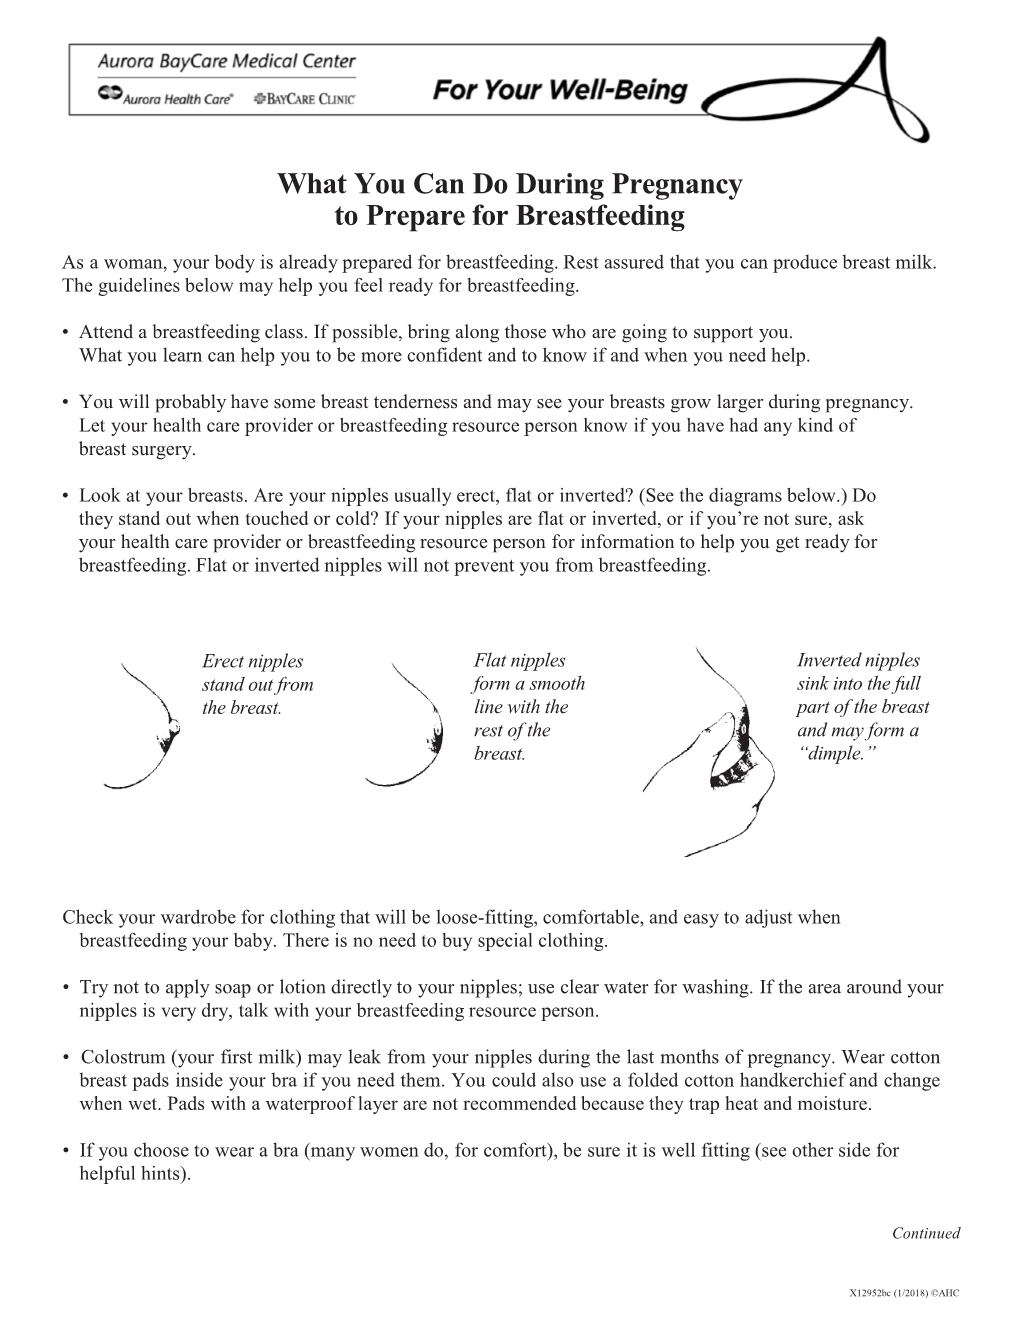 What You Can Do During Pregnancy to Prepare for Breastfeeding